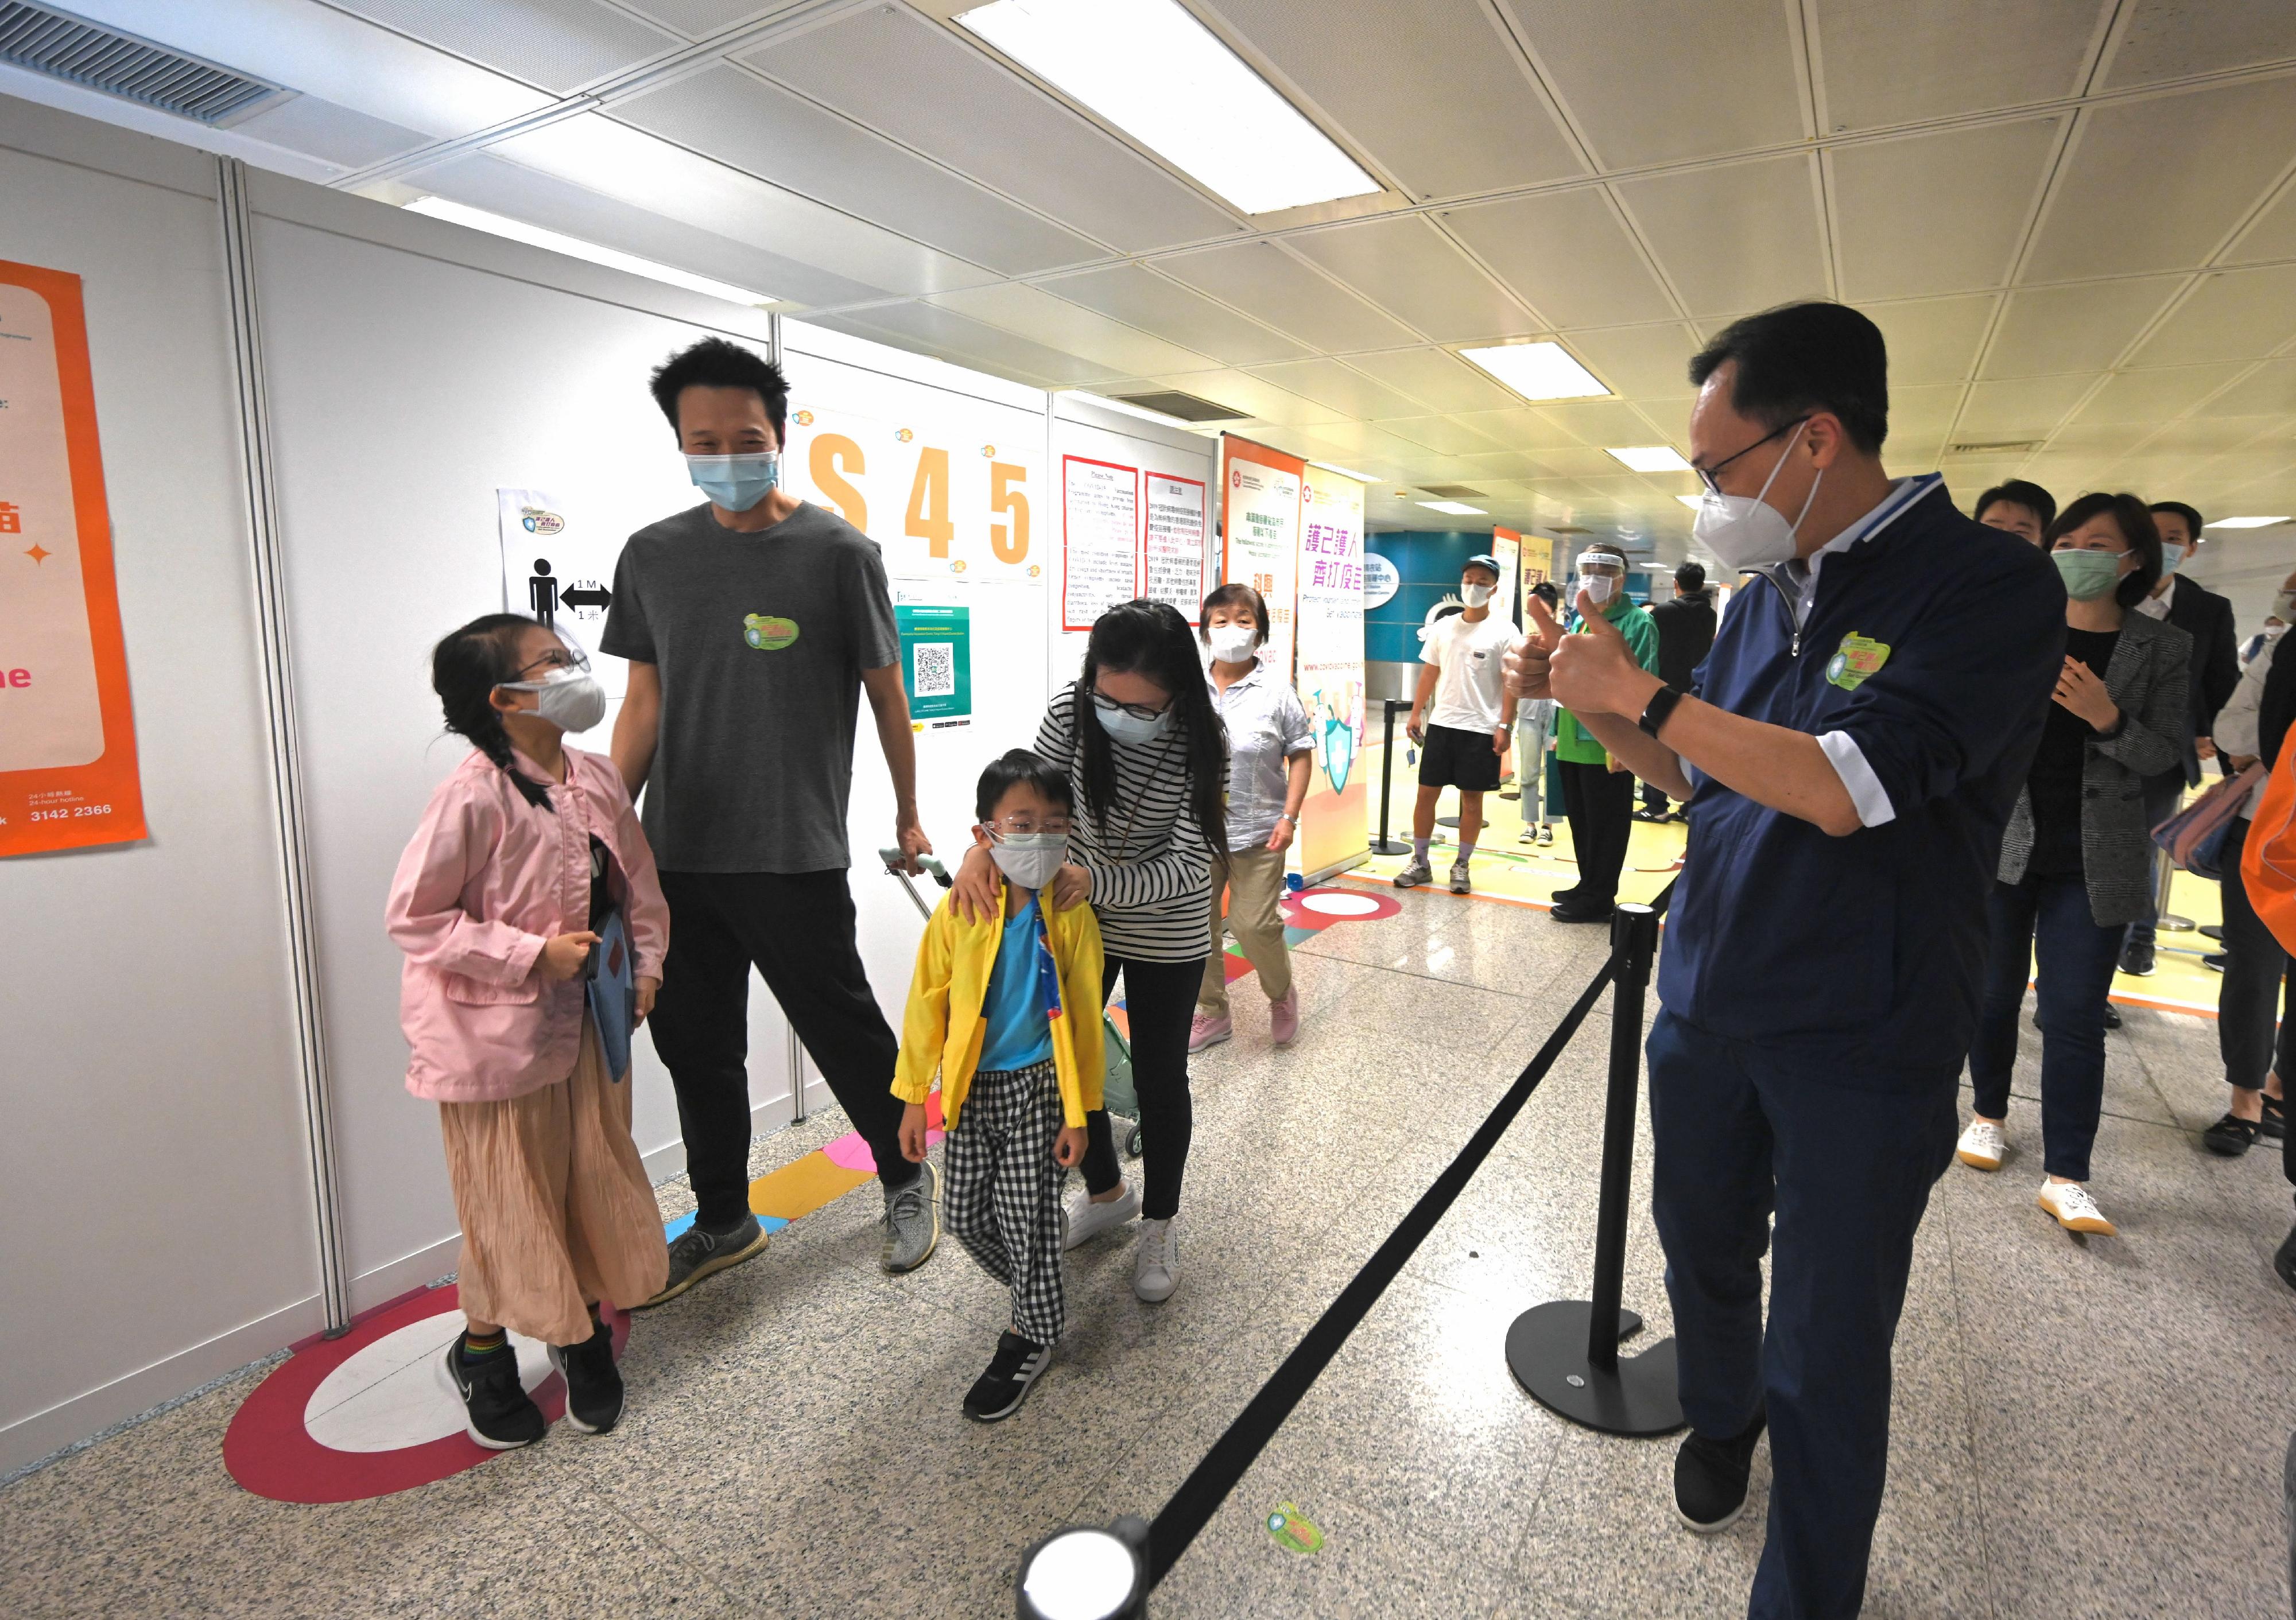 The Secretary for the Civil Service, Mr Patrick Nip, today (March 12) went to Tsing Yi to inspect the operation of the MTR Tsing Yi Station Community Vaccination Centre. Photo shows Mr Nip (right) encouraged members of the public to get vaccinated as early as possible for self-protection.